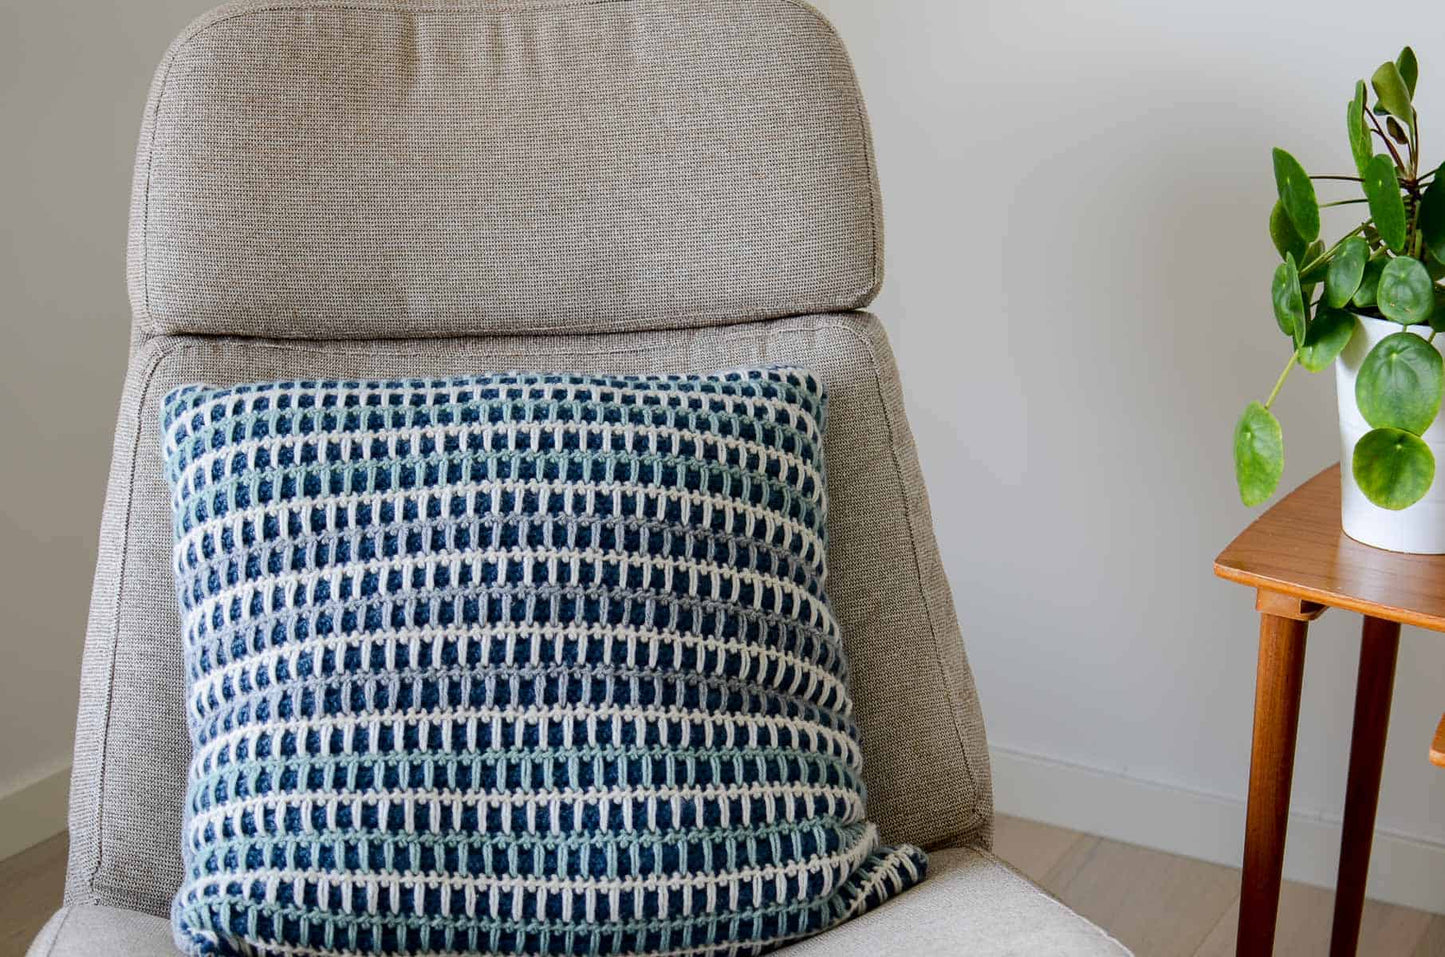 Spikes and Stripes Pillow Cover Crochet Pattern